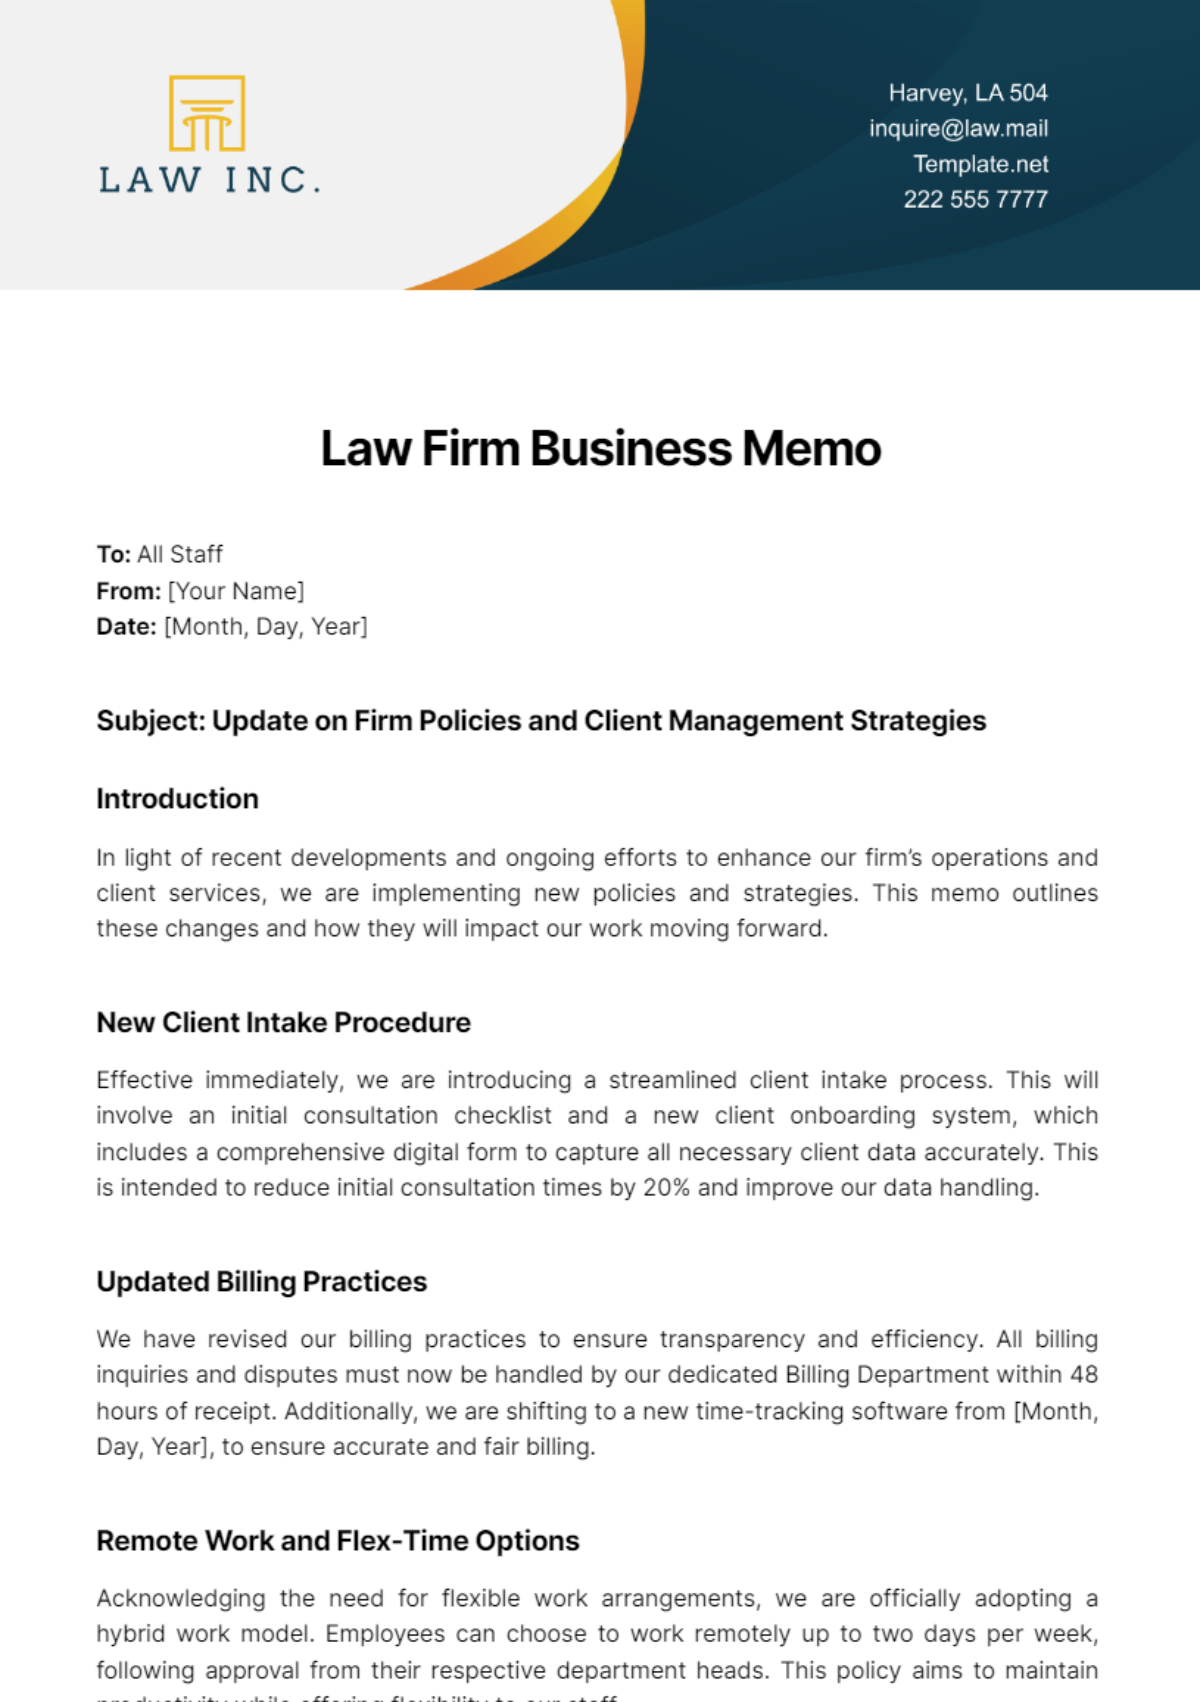 Free Law Firm Business Memo Template